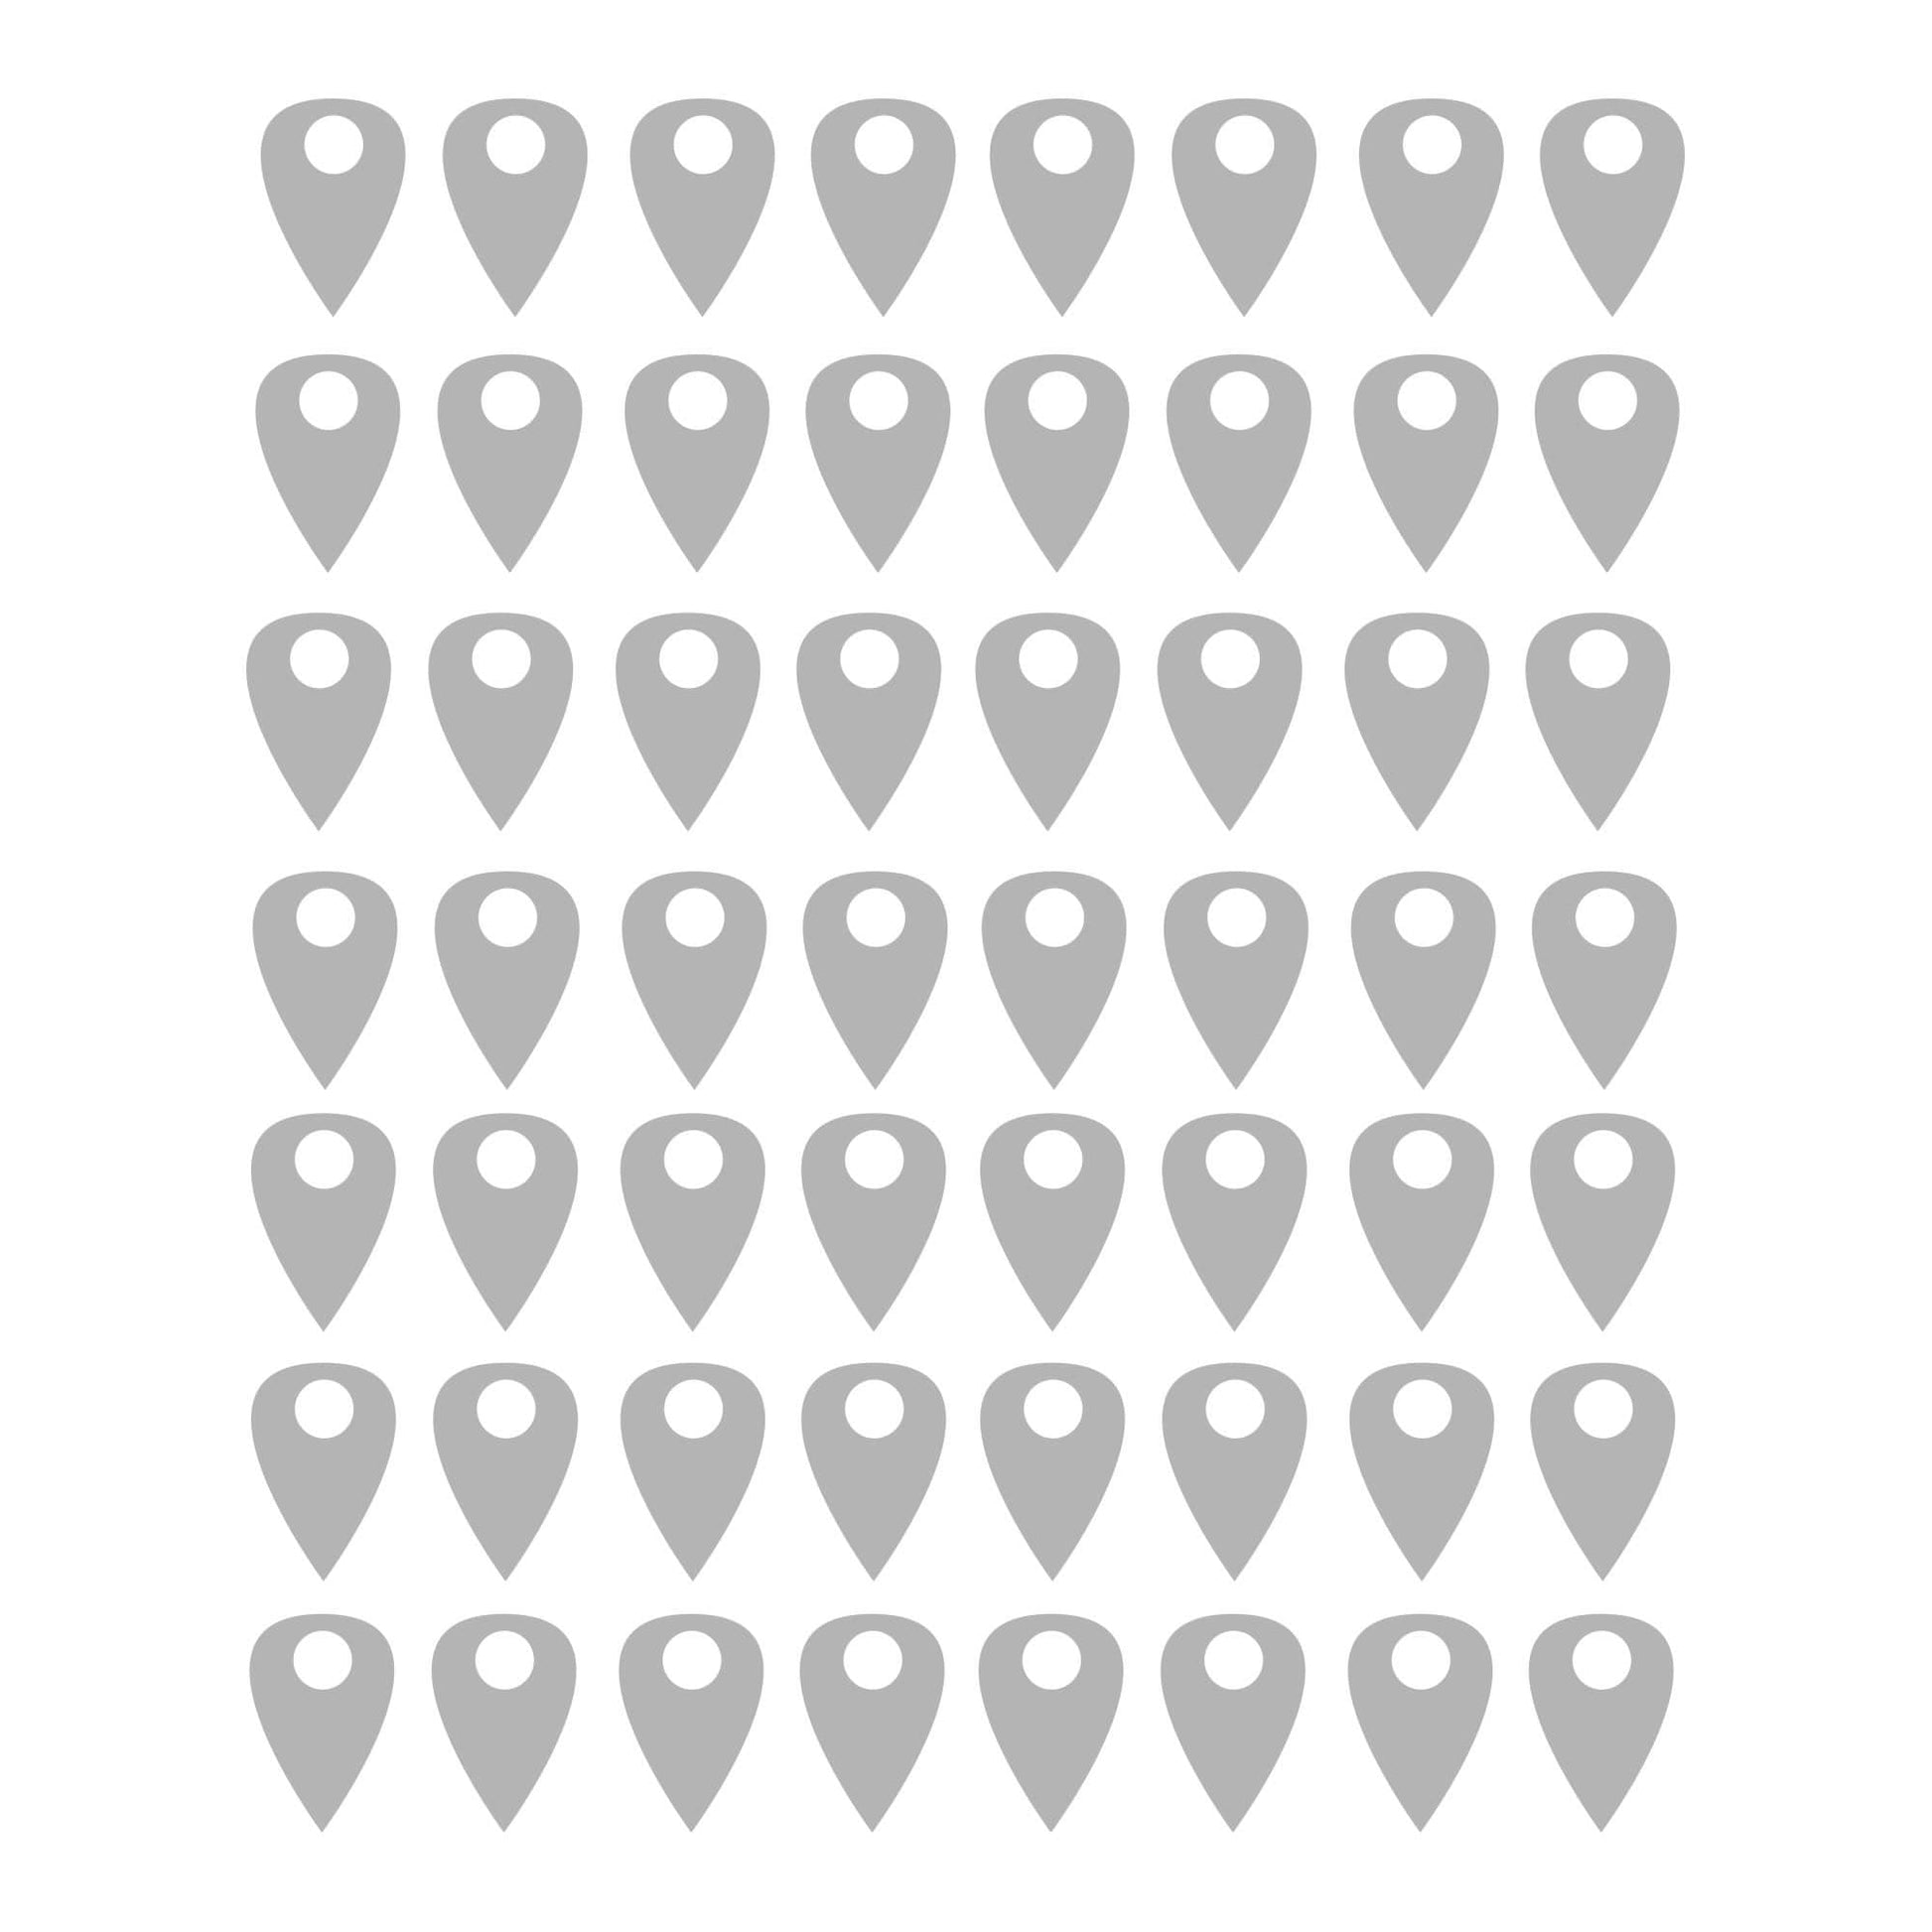 Silver pins on a white background.